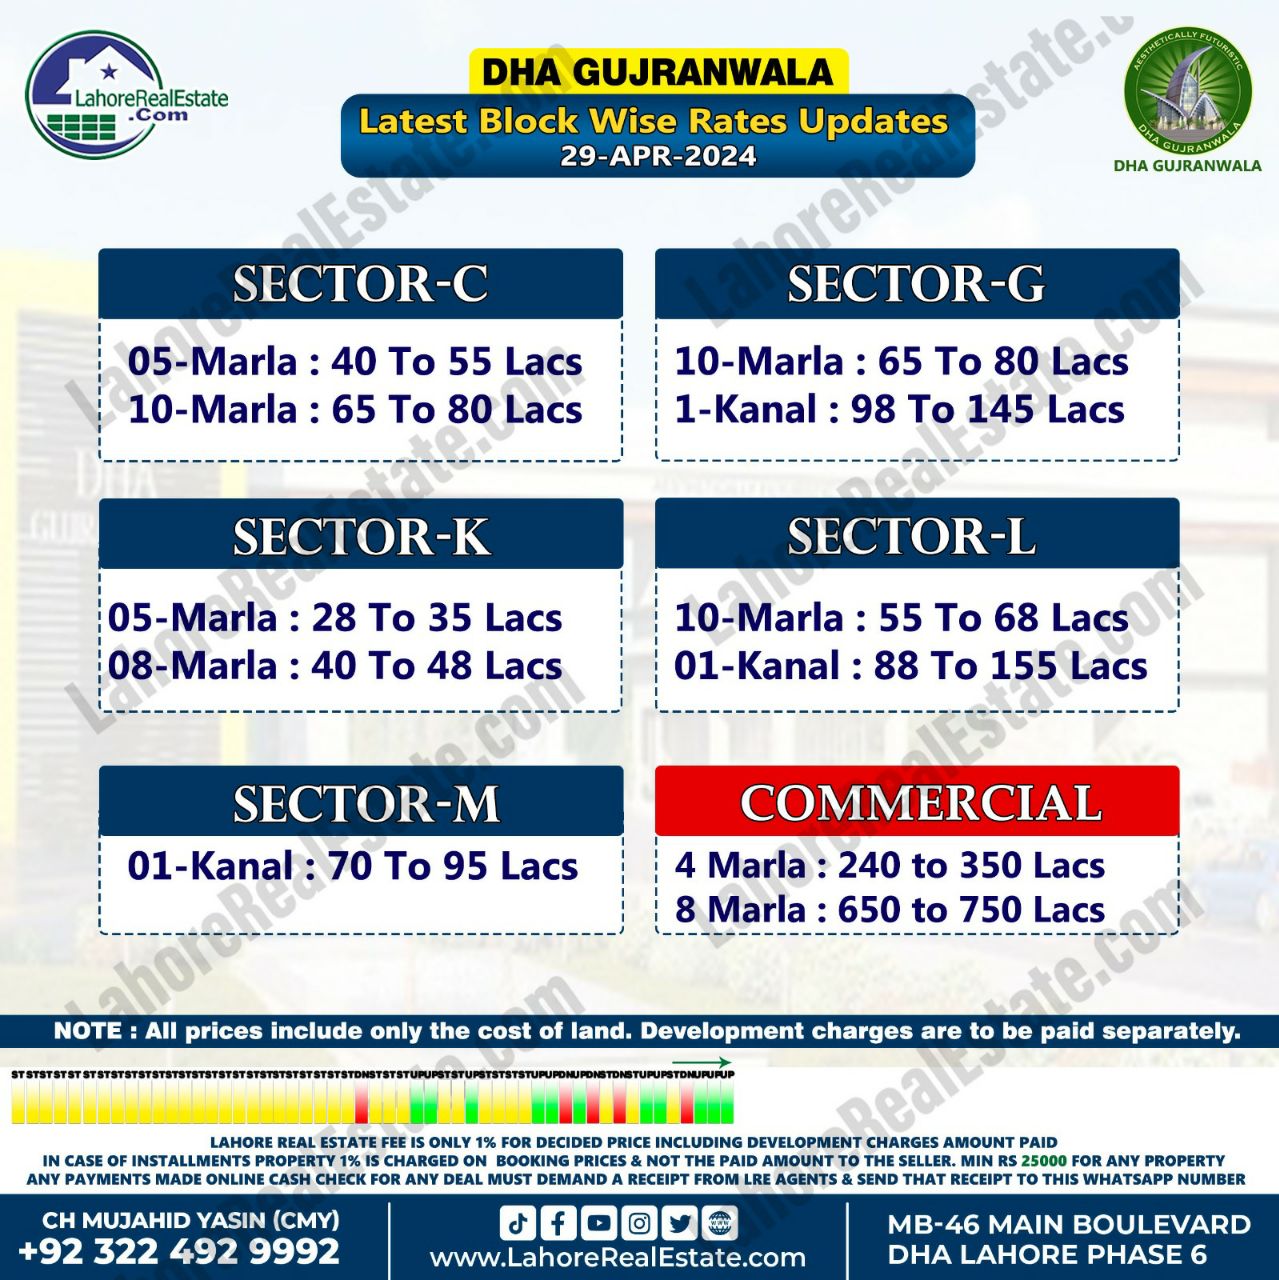 DHA Gujranwala Plot Prices Blockwise Rates 29th April 2024